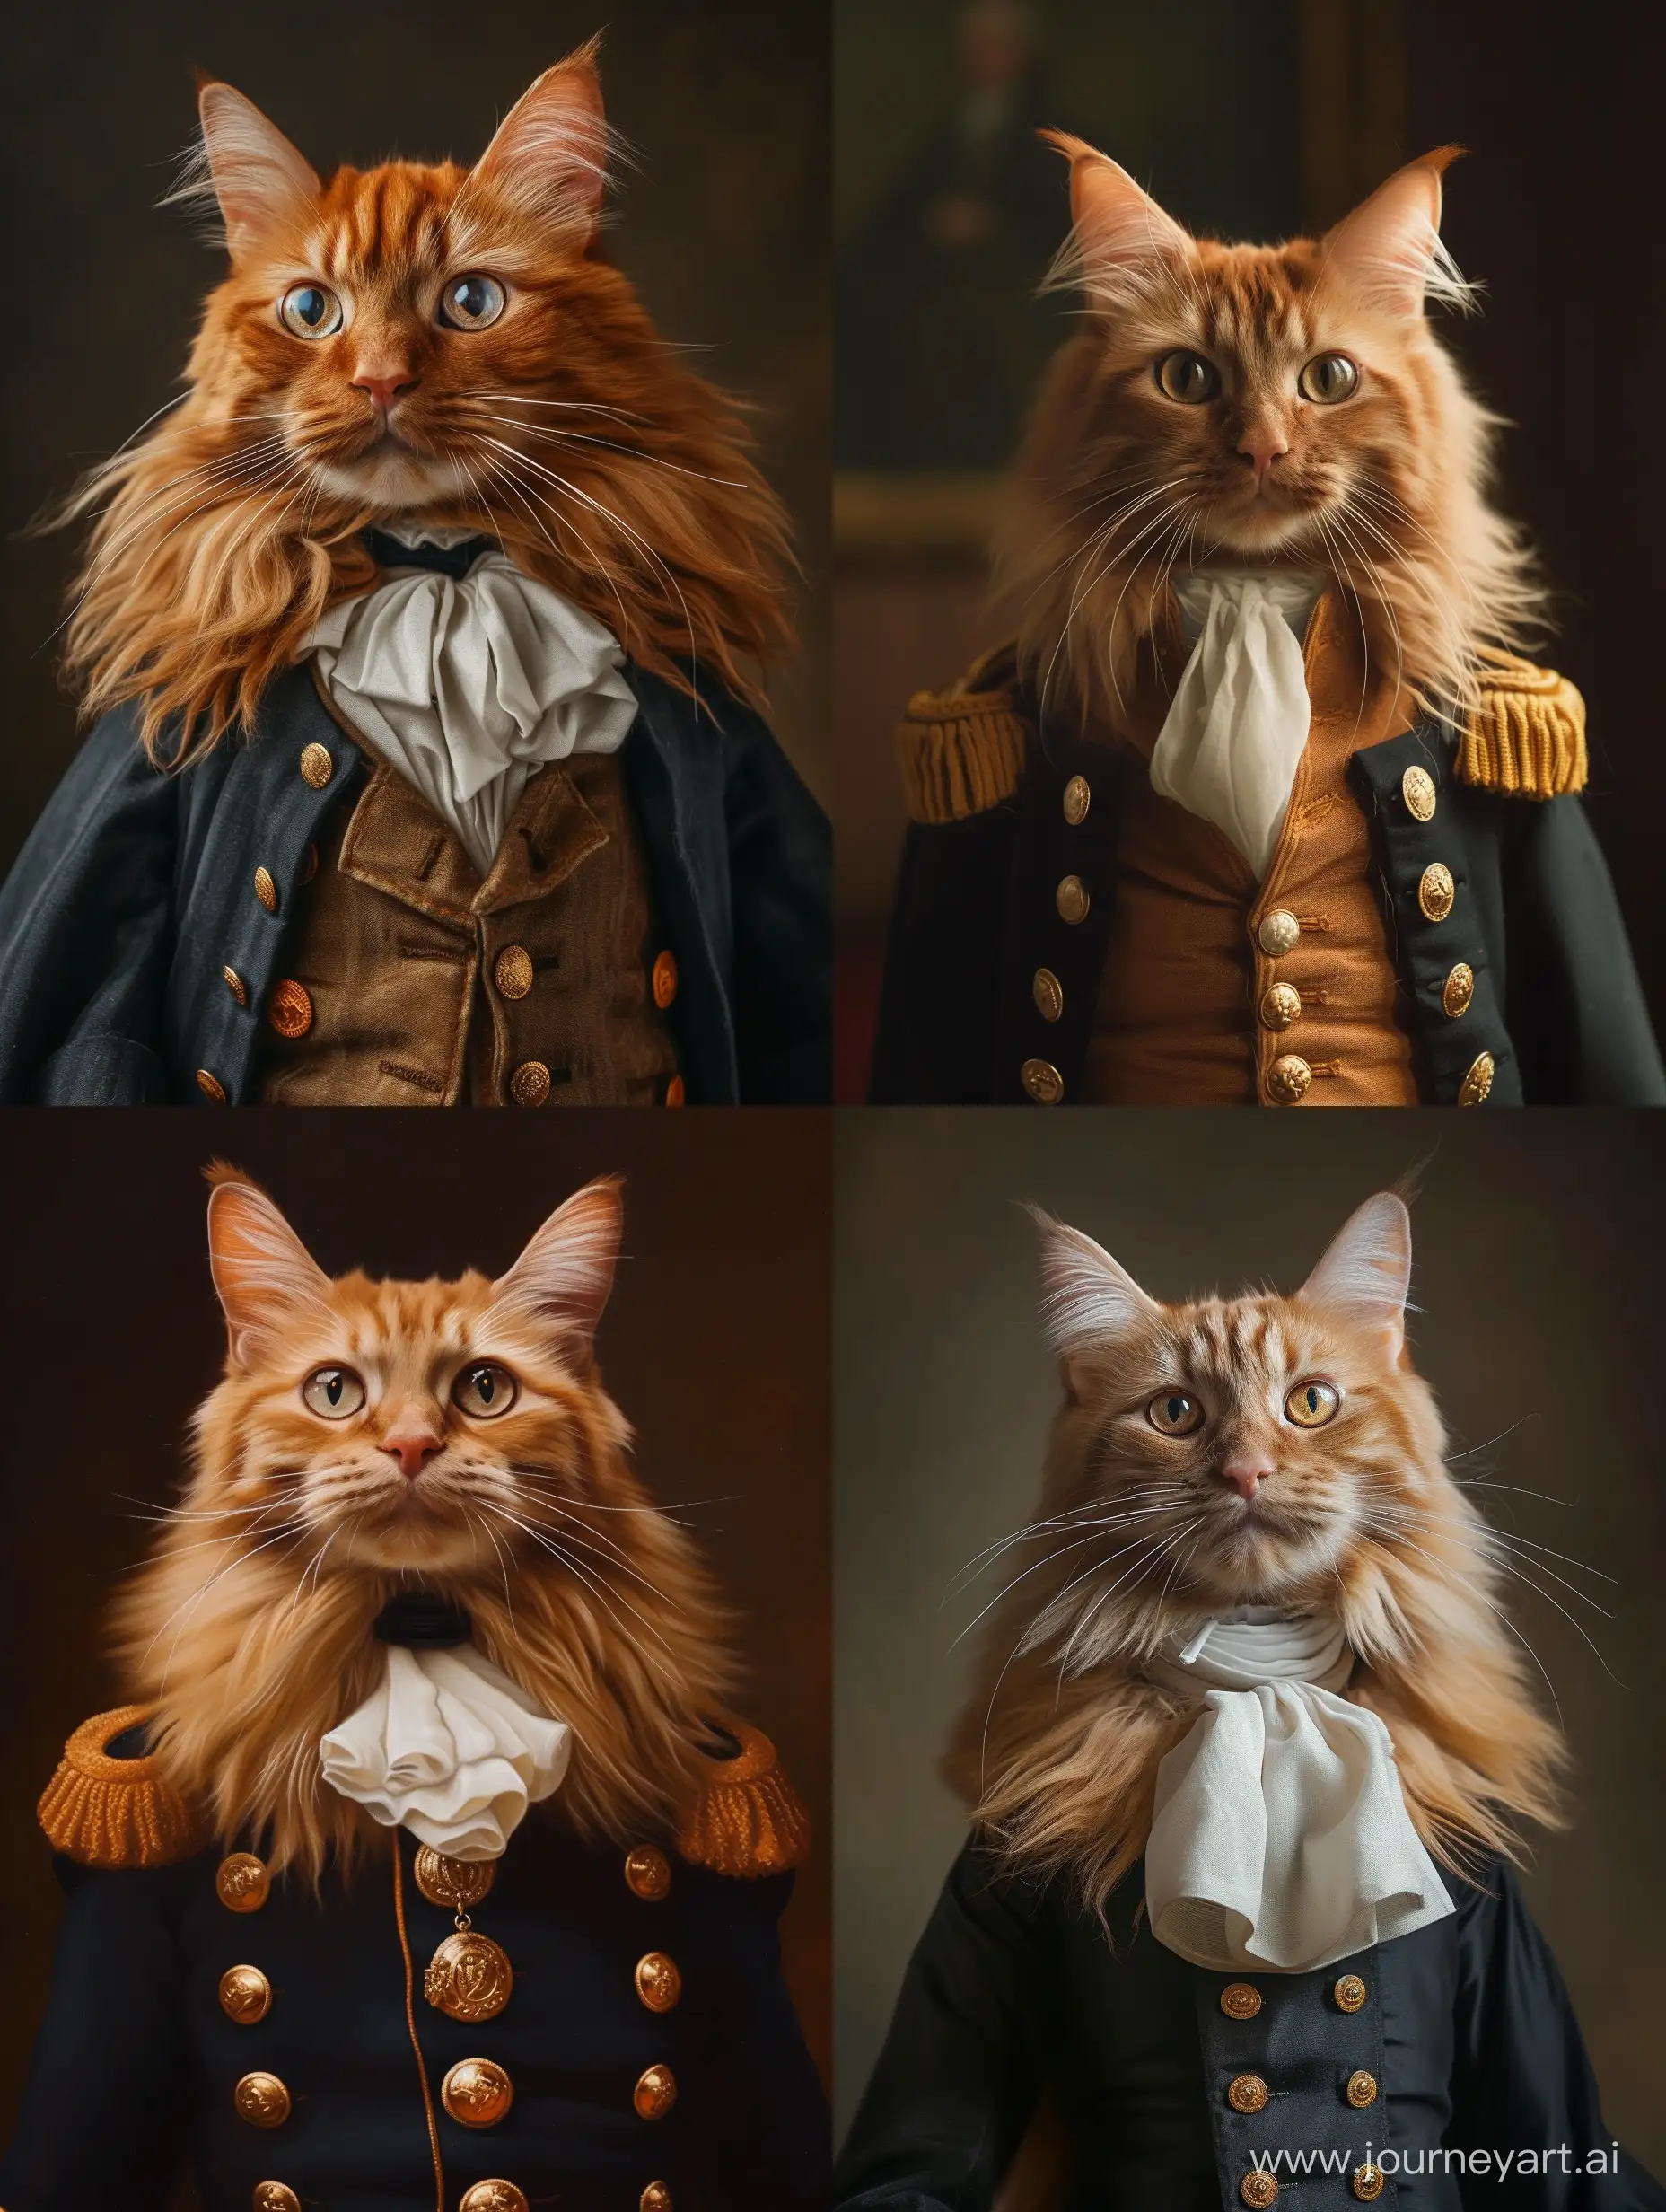 An orange long haired cat, distinguished and regal looking, large innocent looking eyes, dressed like an 18th century british cavalry officer